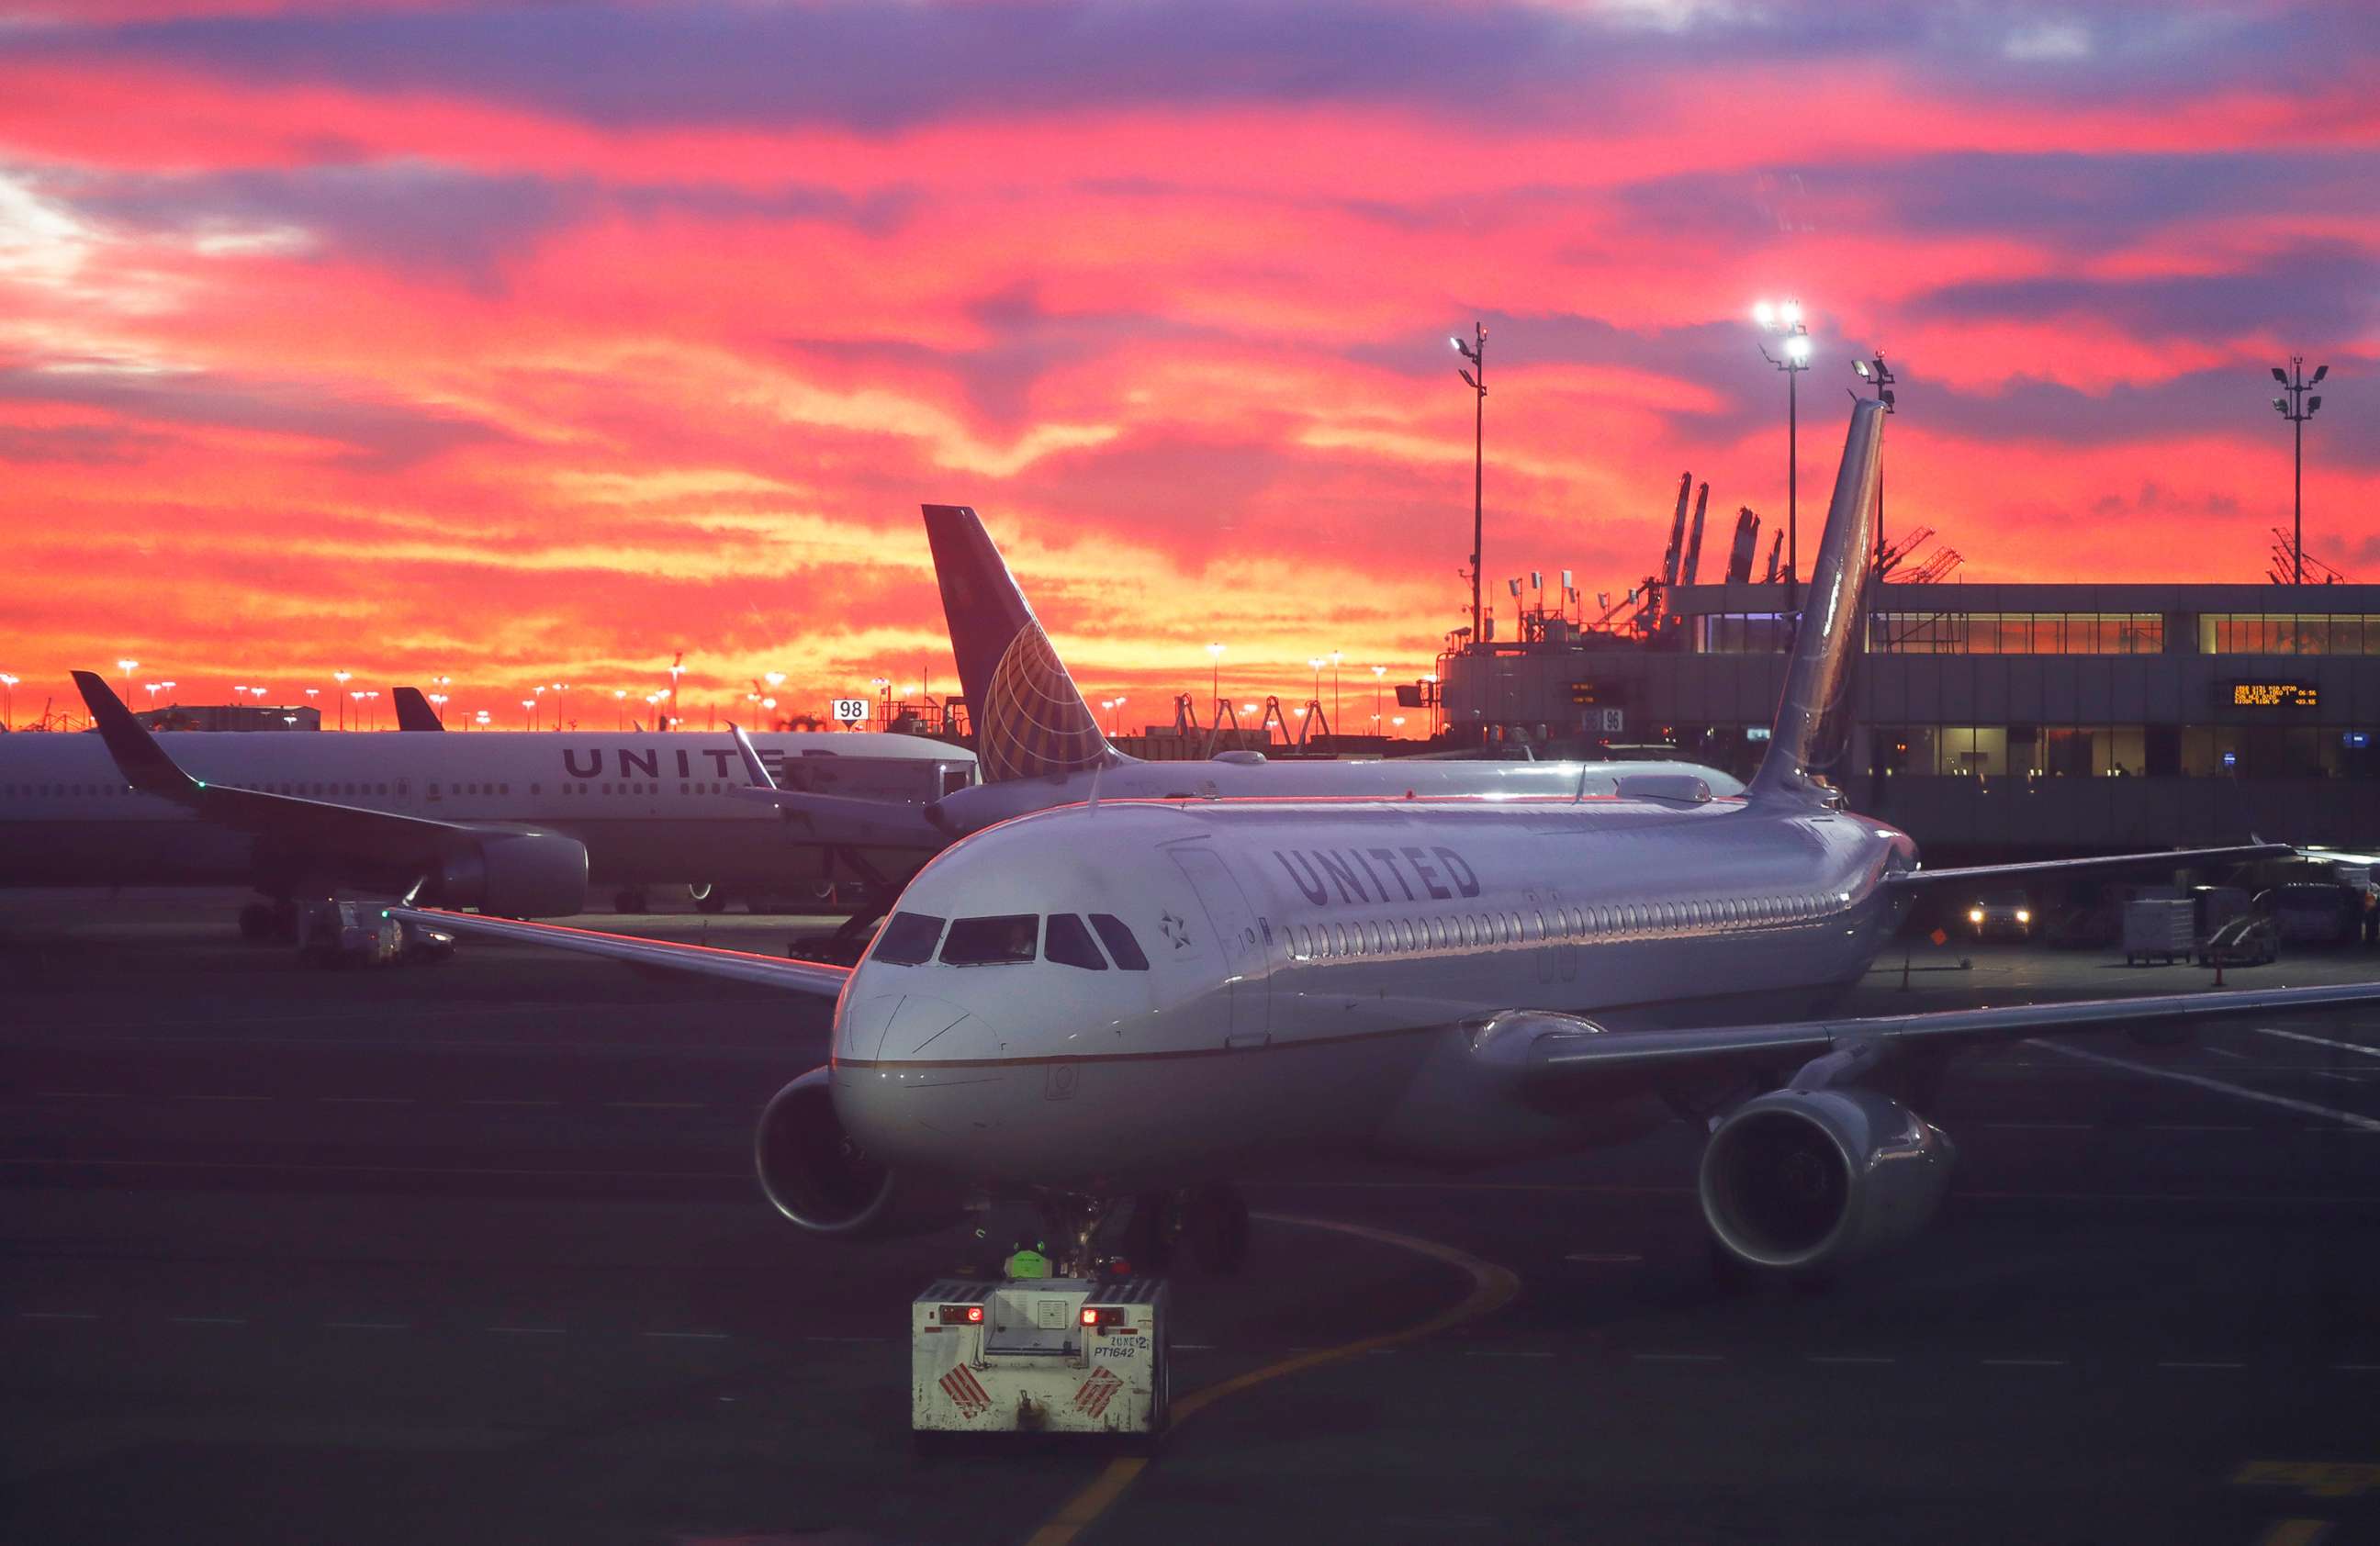 PHOTO: A United Airlines airplane is pushed back from its gate at Newark Liberty International Airport as the sun rises in Newark, N.J., Dec. 13, 2021.